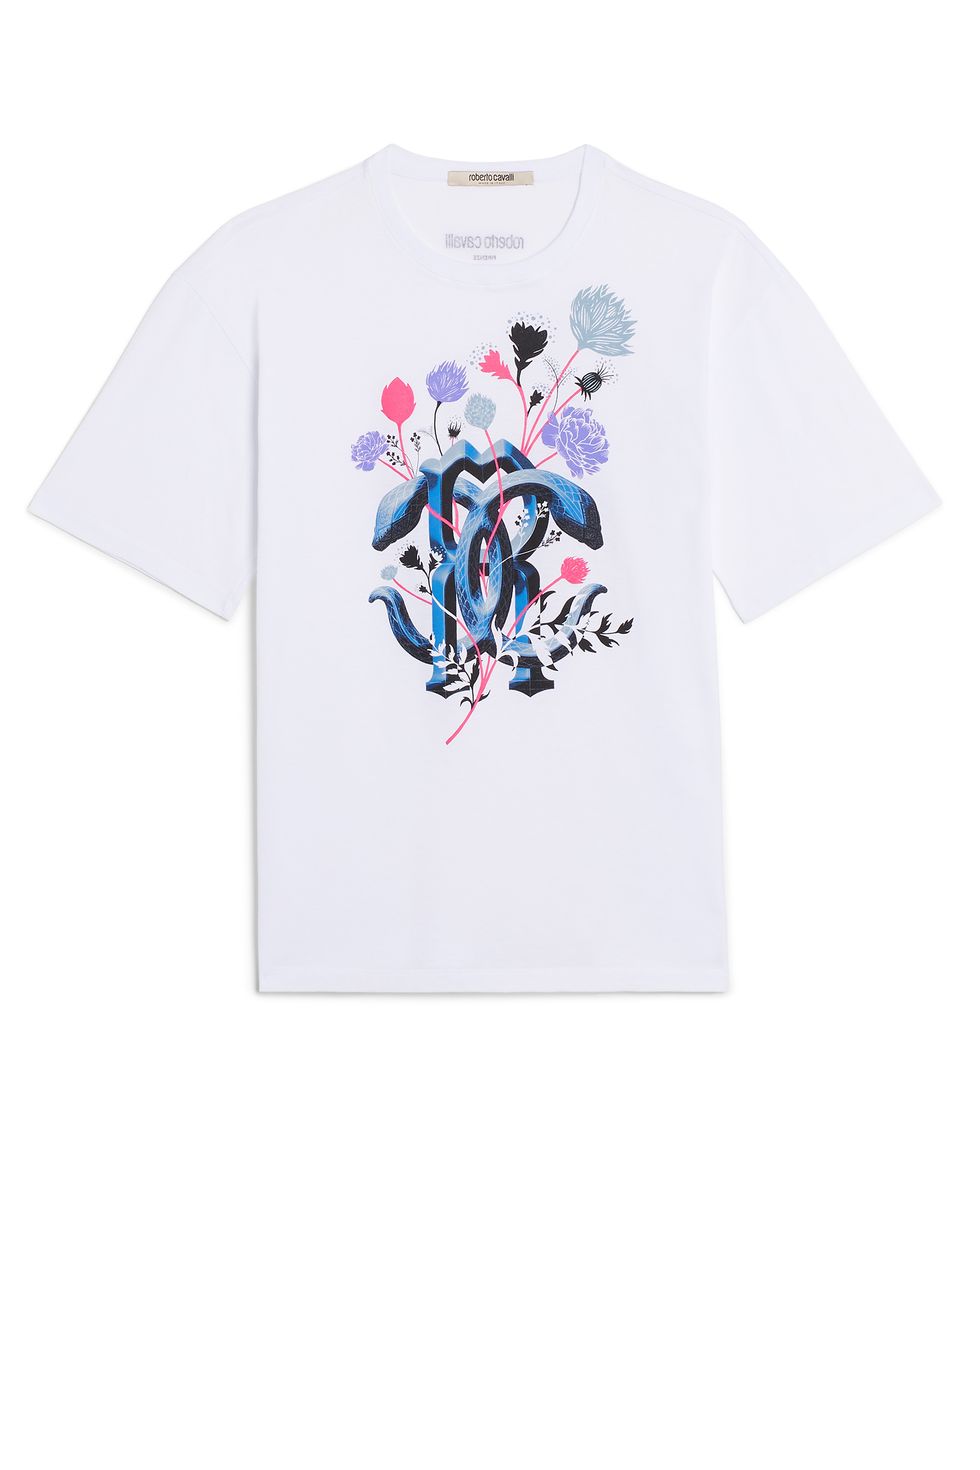 T-shirt, White, Clothing, Product, Sleeve, Top, Active shirt, Font, Plant, Flower, 